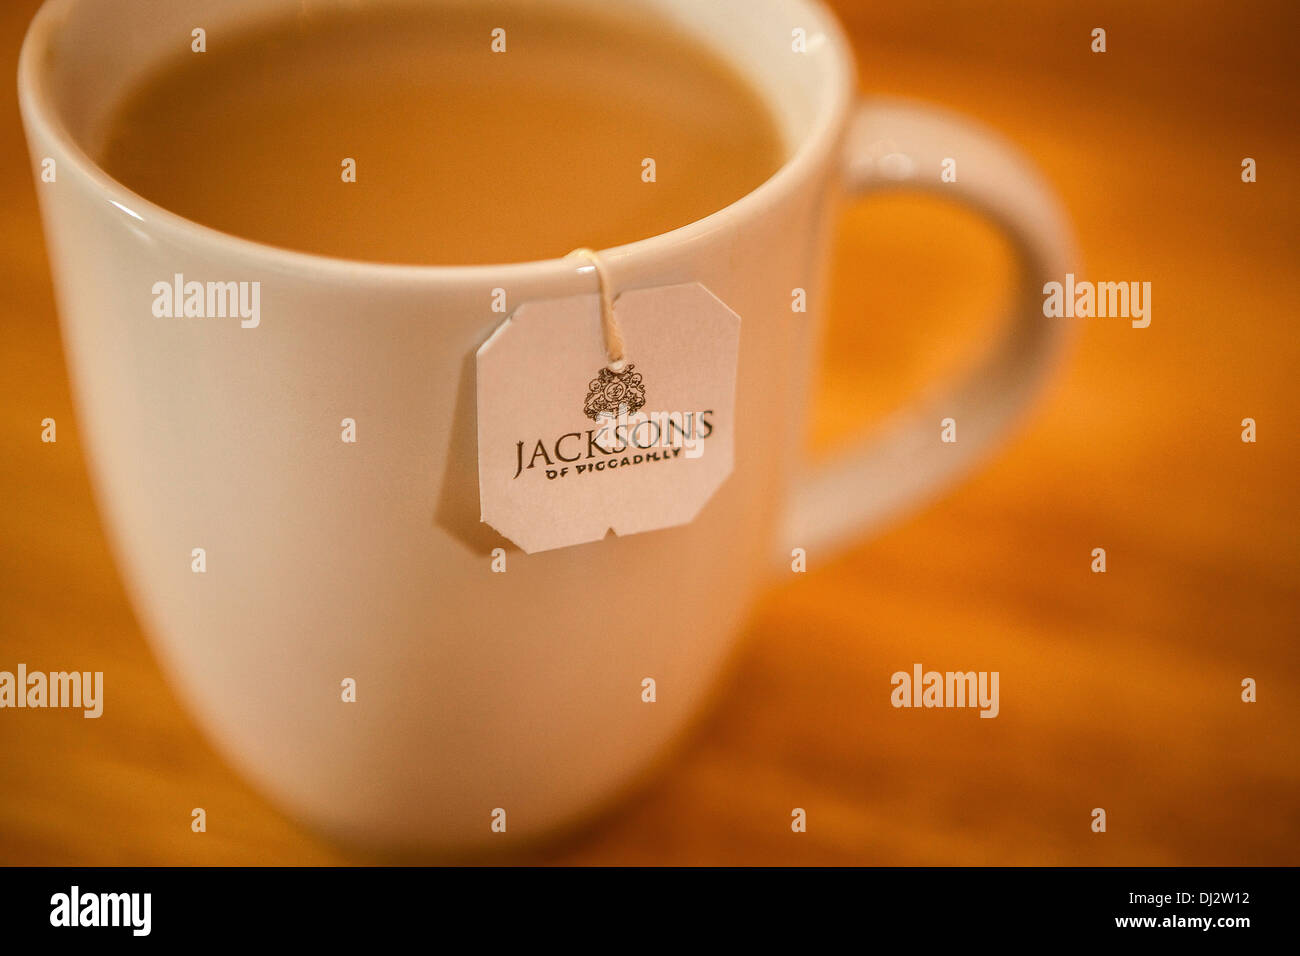 Illustrative image of Jackson's of Piccadilly Tea, an Associated British Foods brand. Stock Photo